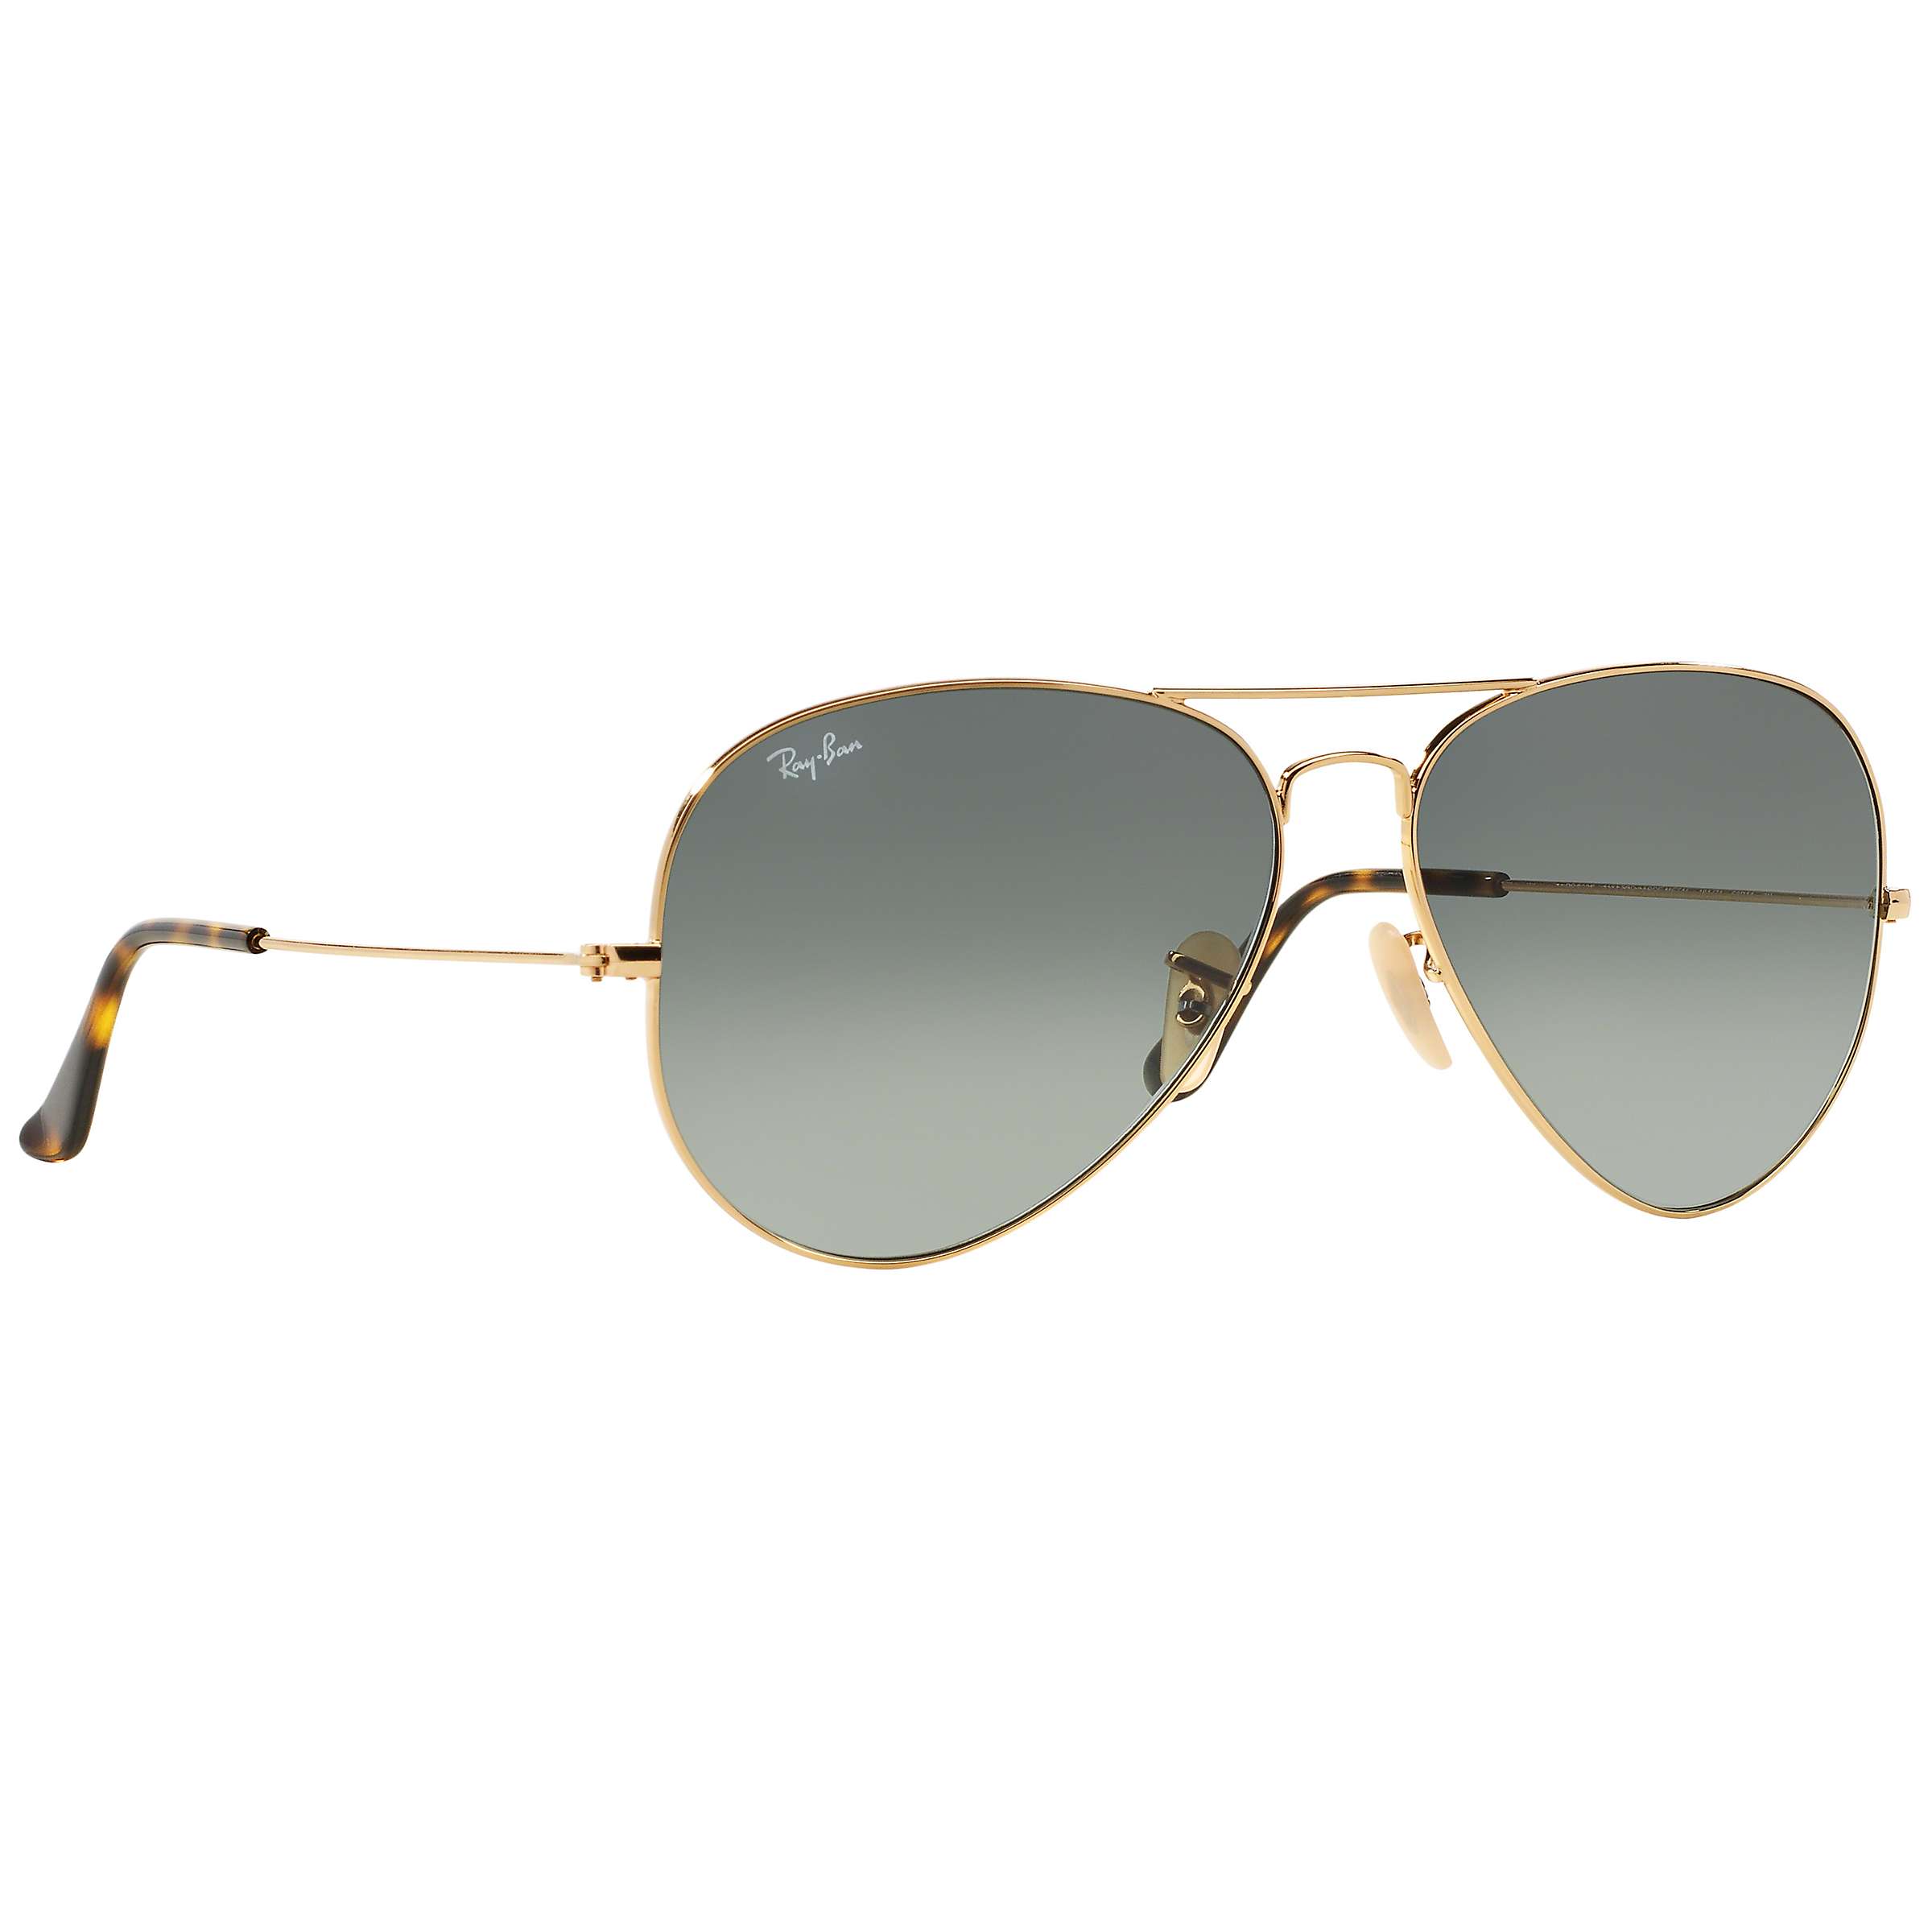 Buy Ray-Ban RB3025 Aviator Sunglasses Online at johnlewis.com